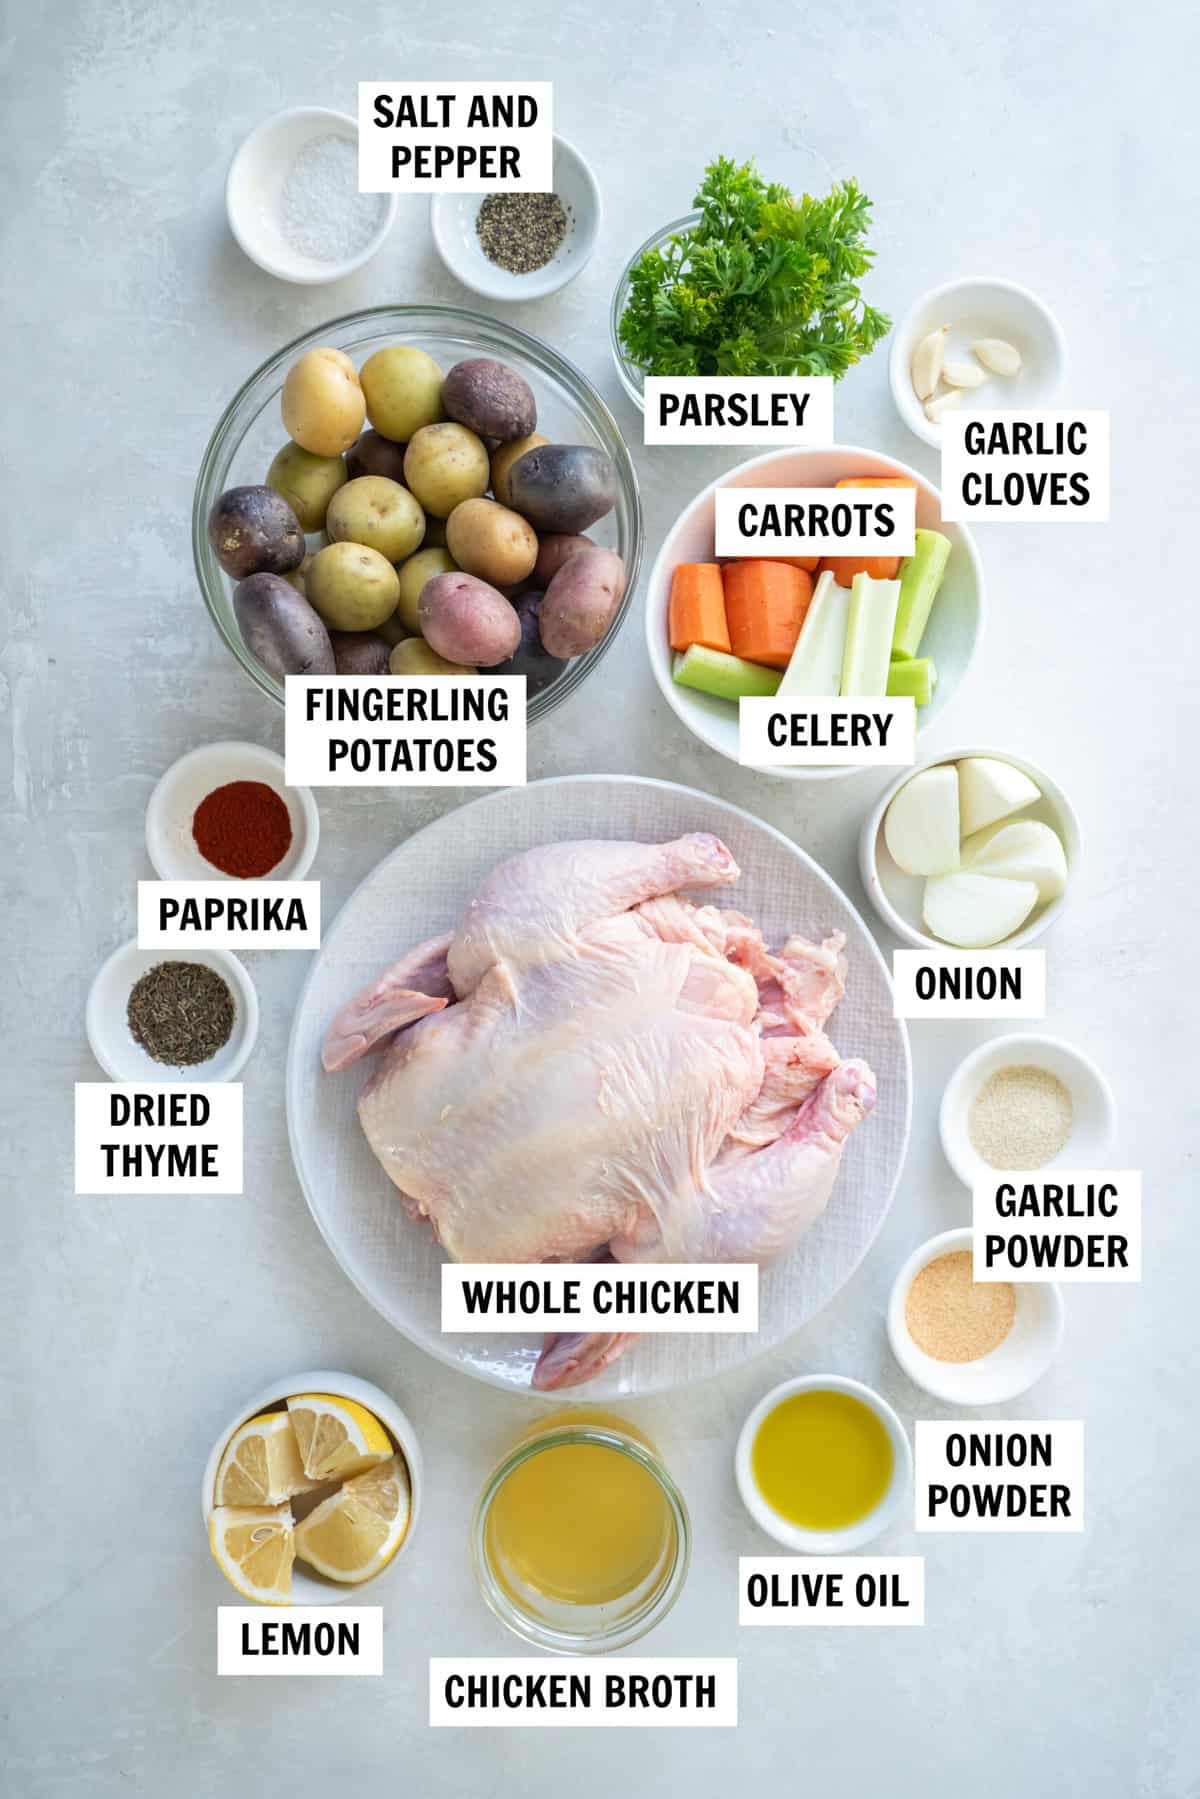 All of the ingredients for dutch oven whole chicken on a white countertop including whole chicken, celery, carrots, lemon, onion, chicken broth, olive oil, finergling potatoes, garlic and spices.